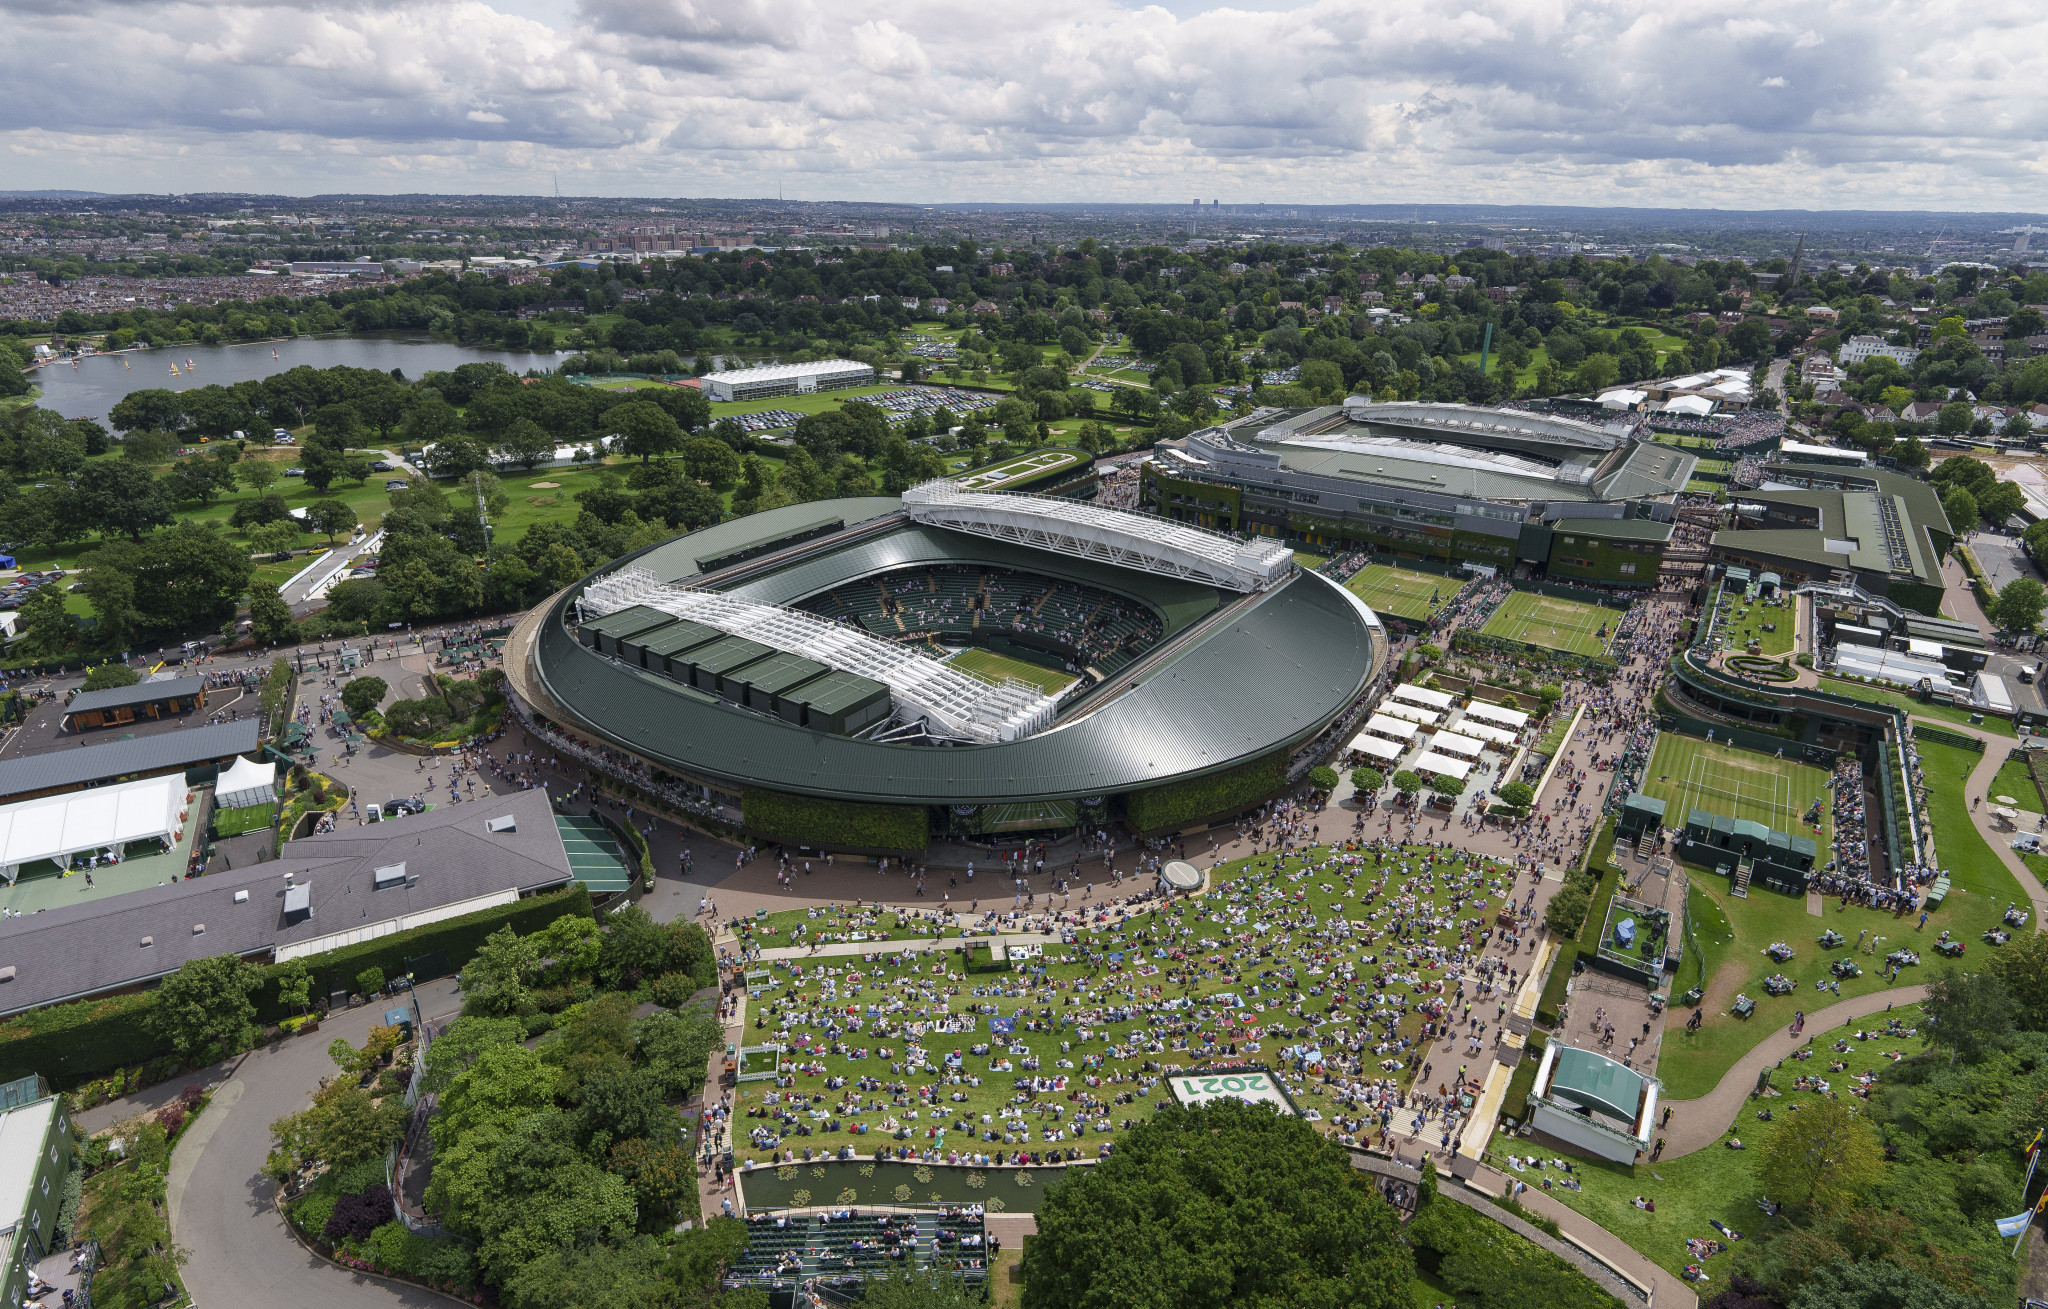 Wimbledon organisers poised to allow return of Russian and Belarusian players after significant pressure